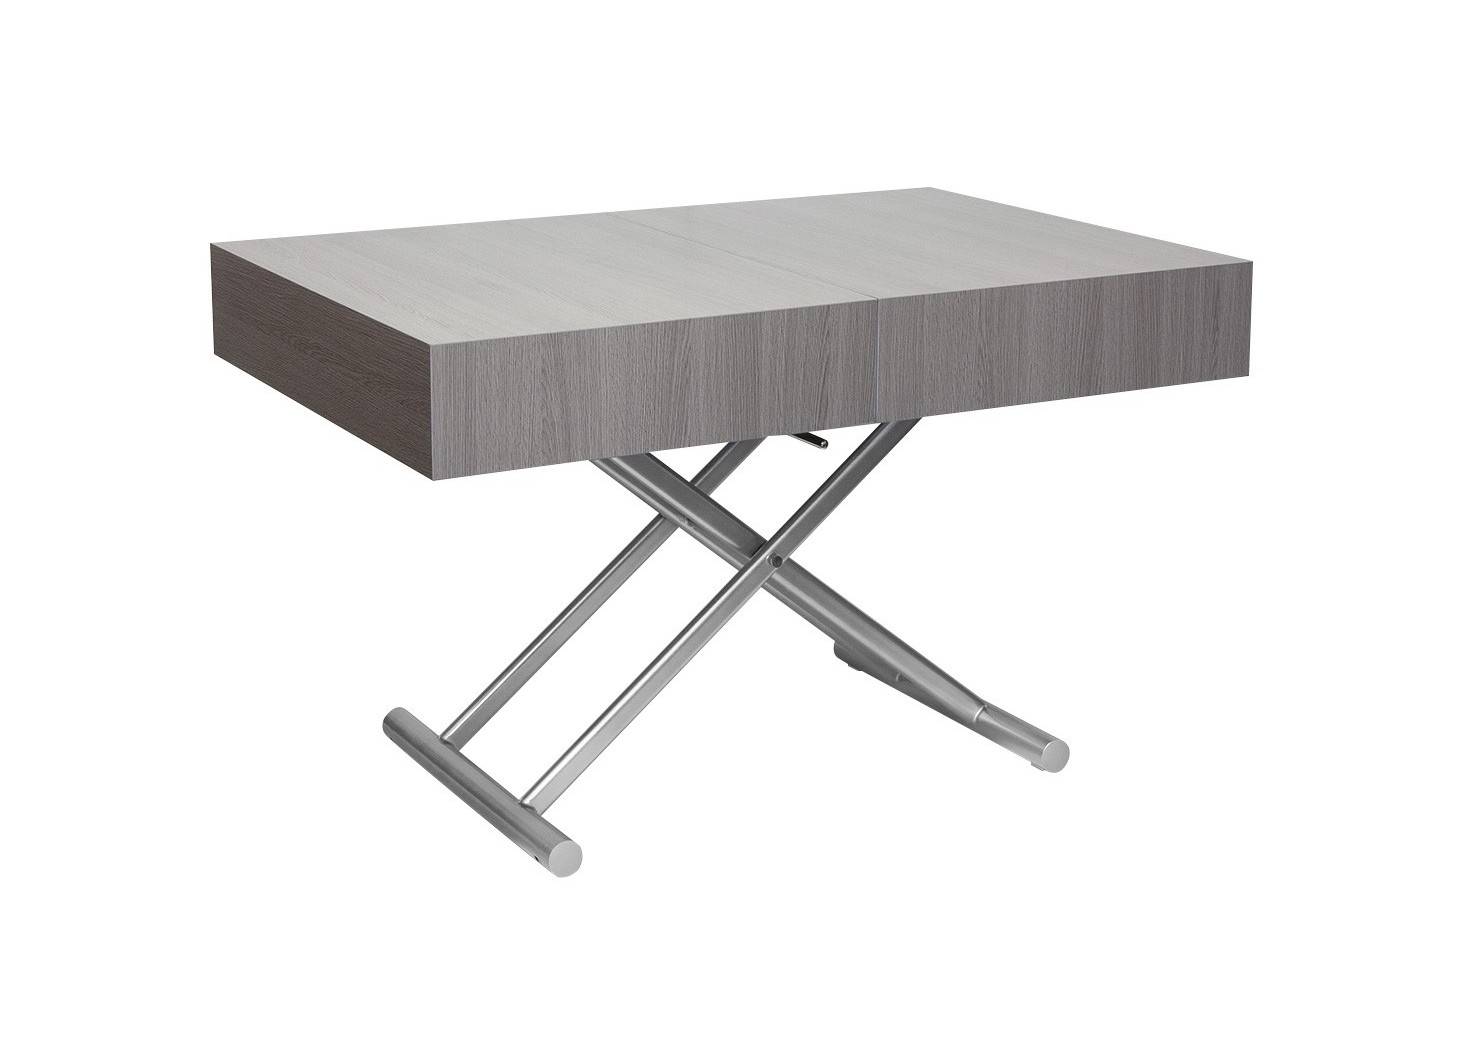 Table basse extensbile relevable - blanche